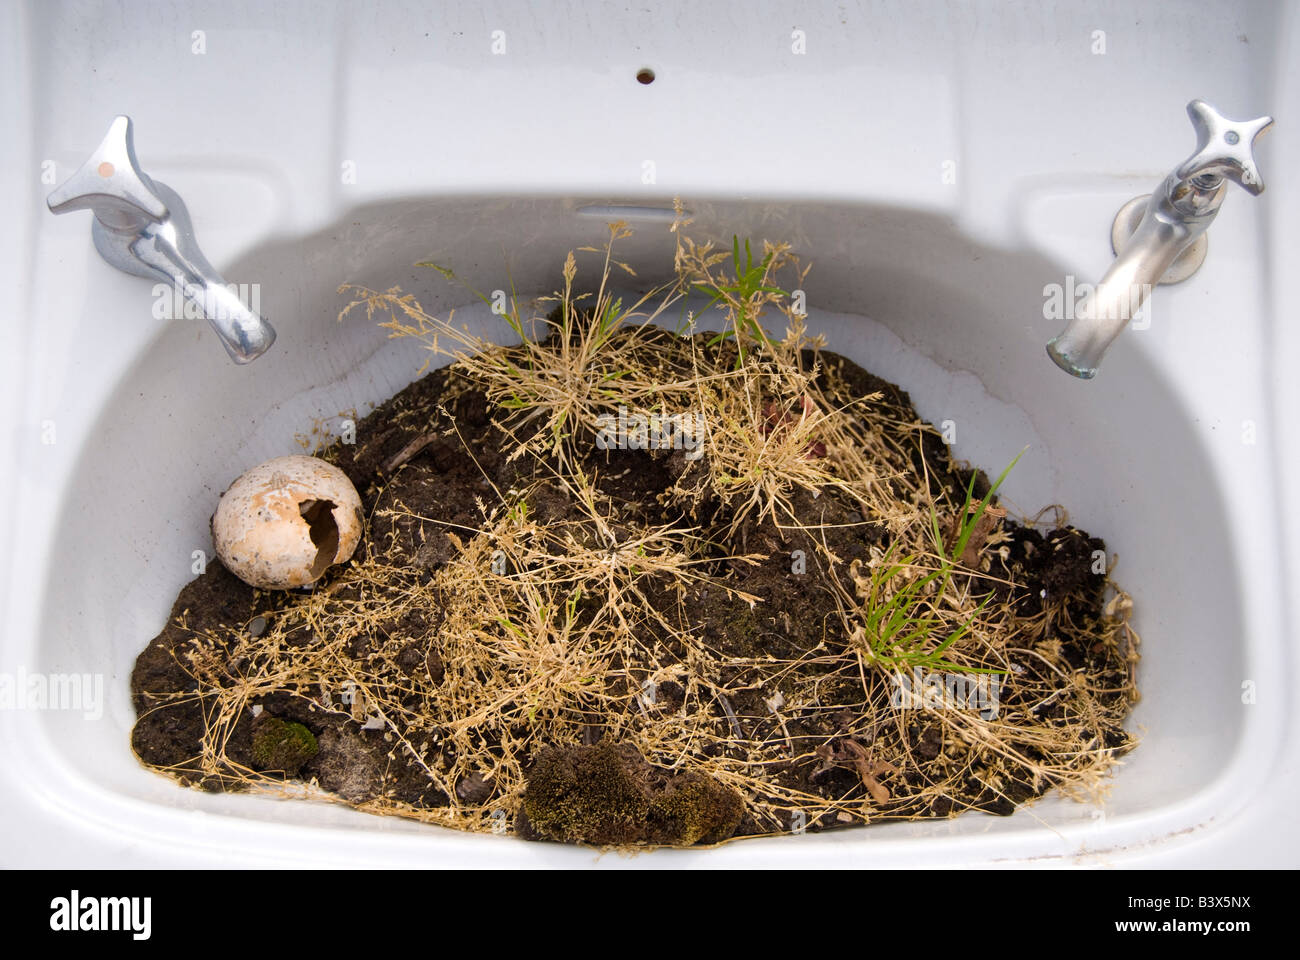 Sink Garden Soil Grass And A Newly Hatched Egg In A